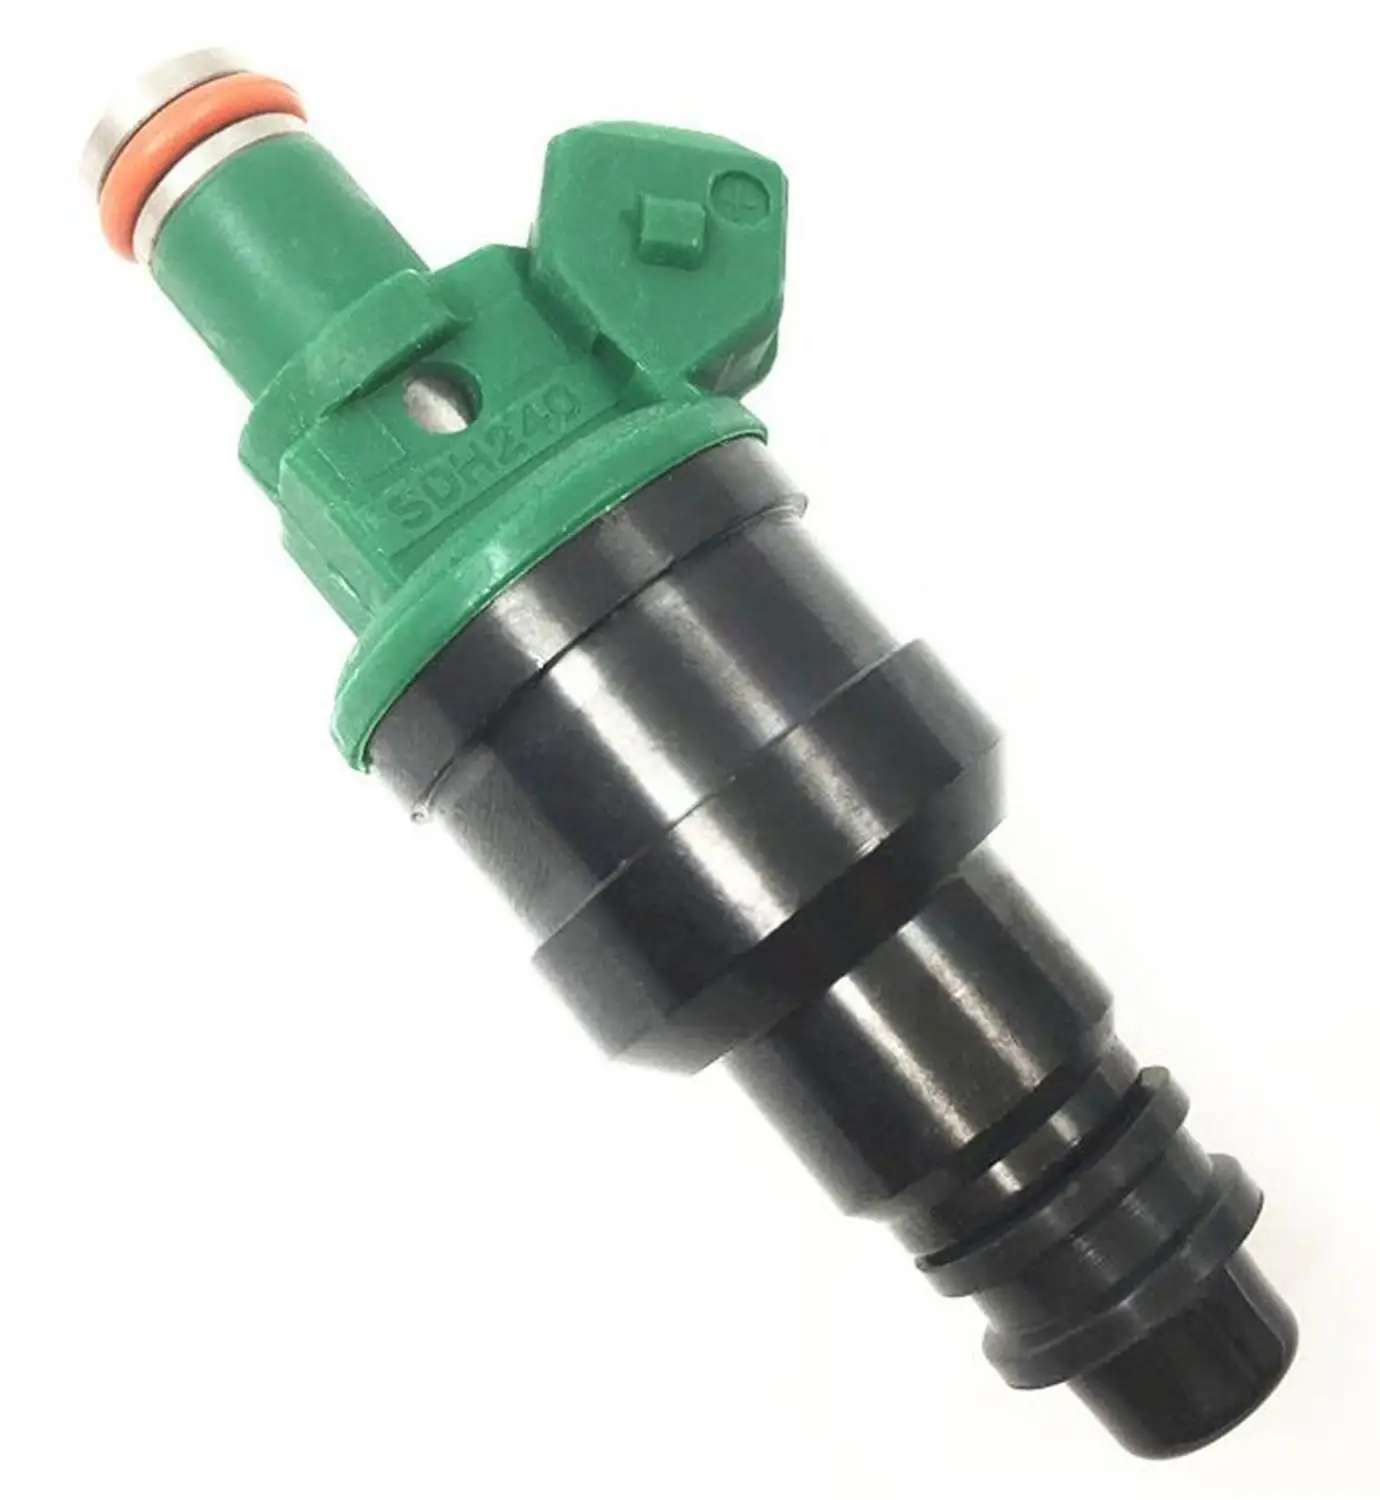 

Pack of 6 Original Fuel Injectors Injection Nozzles MD189021 INP-534 INP534 Fuel Spray Nozzles for Mitsubishi Cars